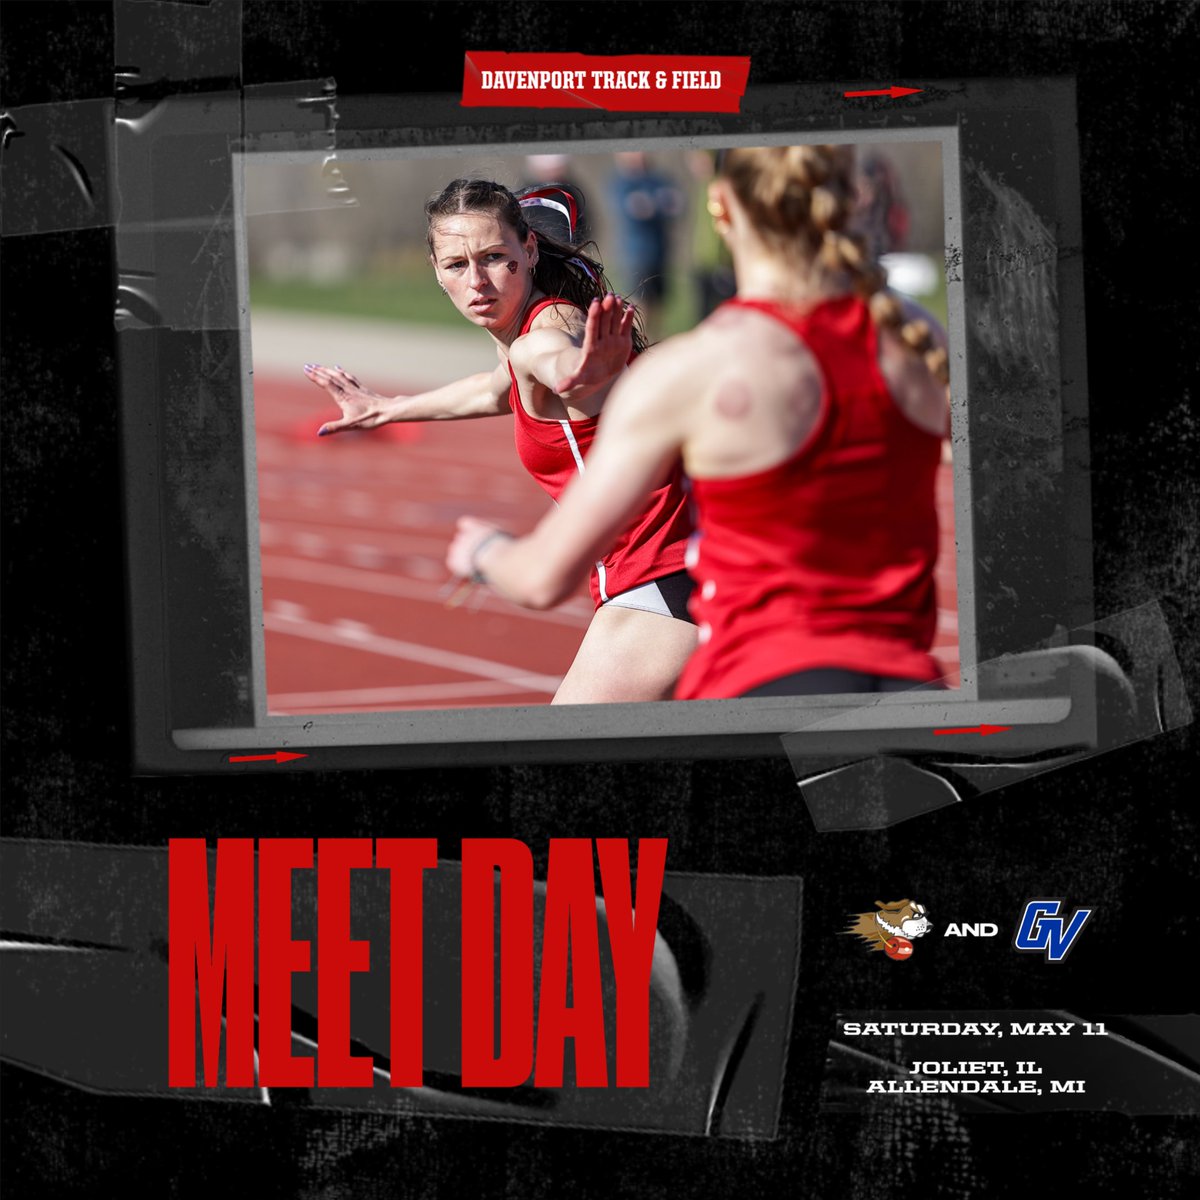 Track and Field Meet Day

The Panthers will be sending select student-athletes to Joliet, IL and Allendale, MI for last chance meets today.

#DUWork #DUTF #DUPanthers